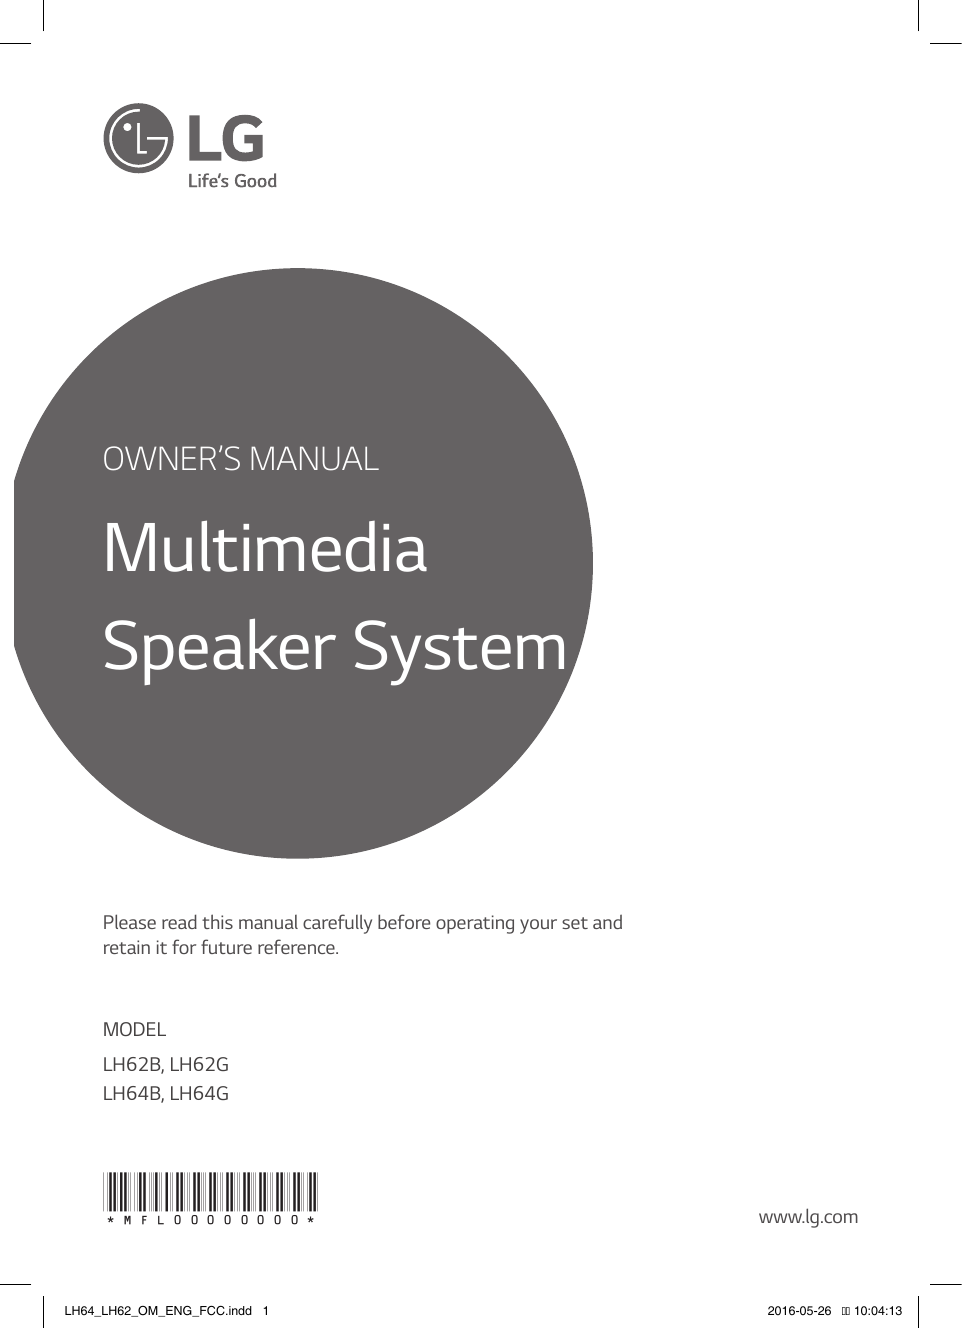 OWNER’S MANUALMultimedia Speaker SystemPlease read this manual carefully before operating your set and retain it for future reference.MODELLH62B, LH62G LH64B, LH64Gwww.lg.com*mfl00000000*LH64_LH62_OM_ENG_FCC.indd   1 2016-05-26   �� 10:04:13